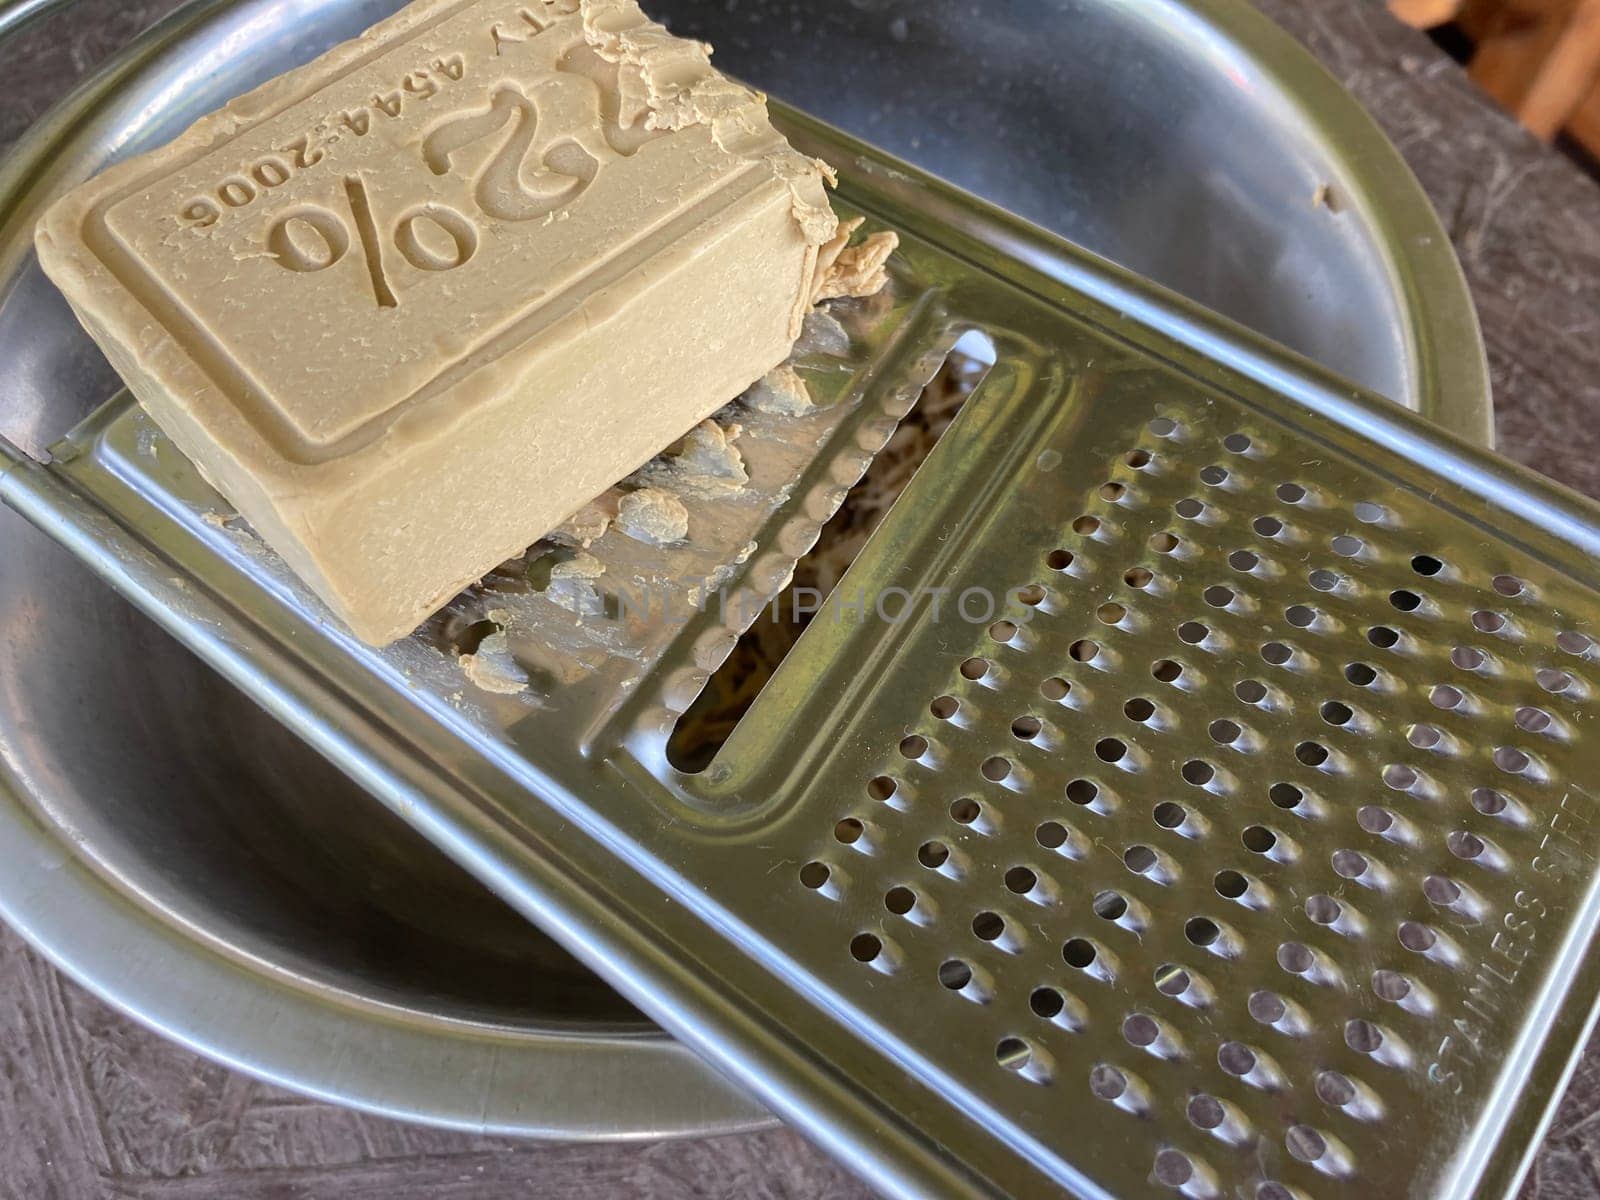 Grating laundry soap on a food grater by architectphd